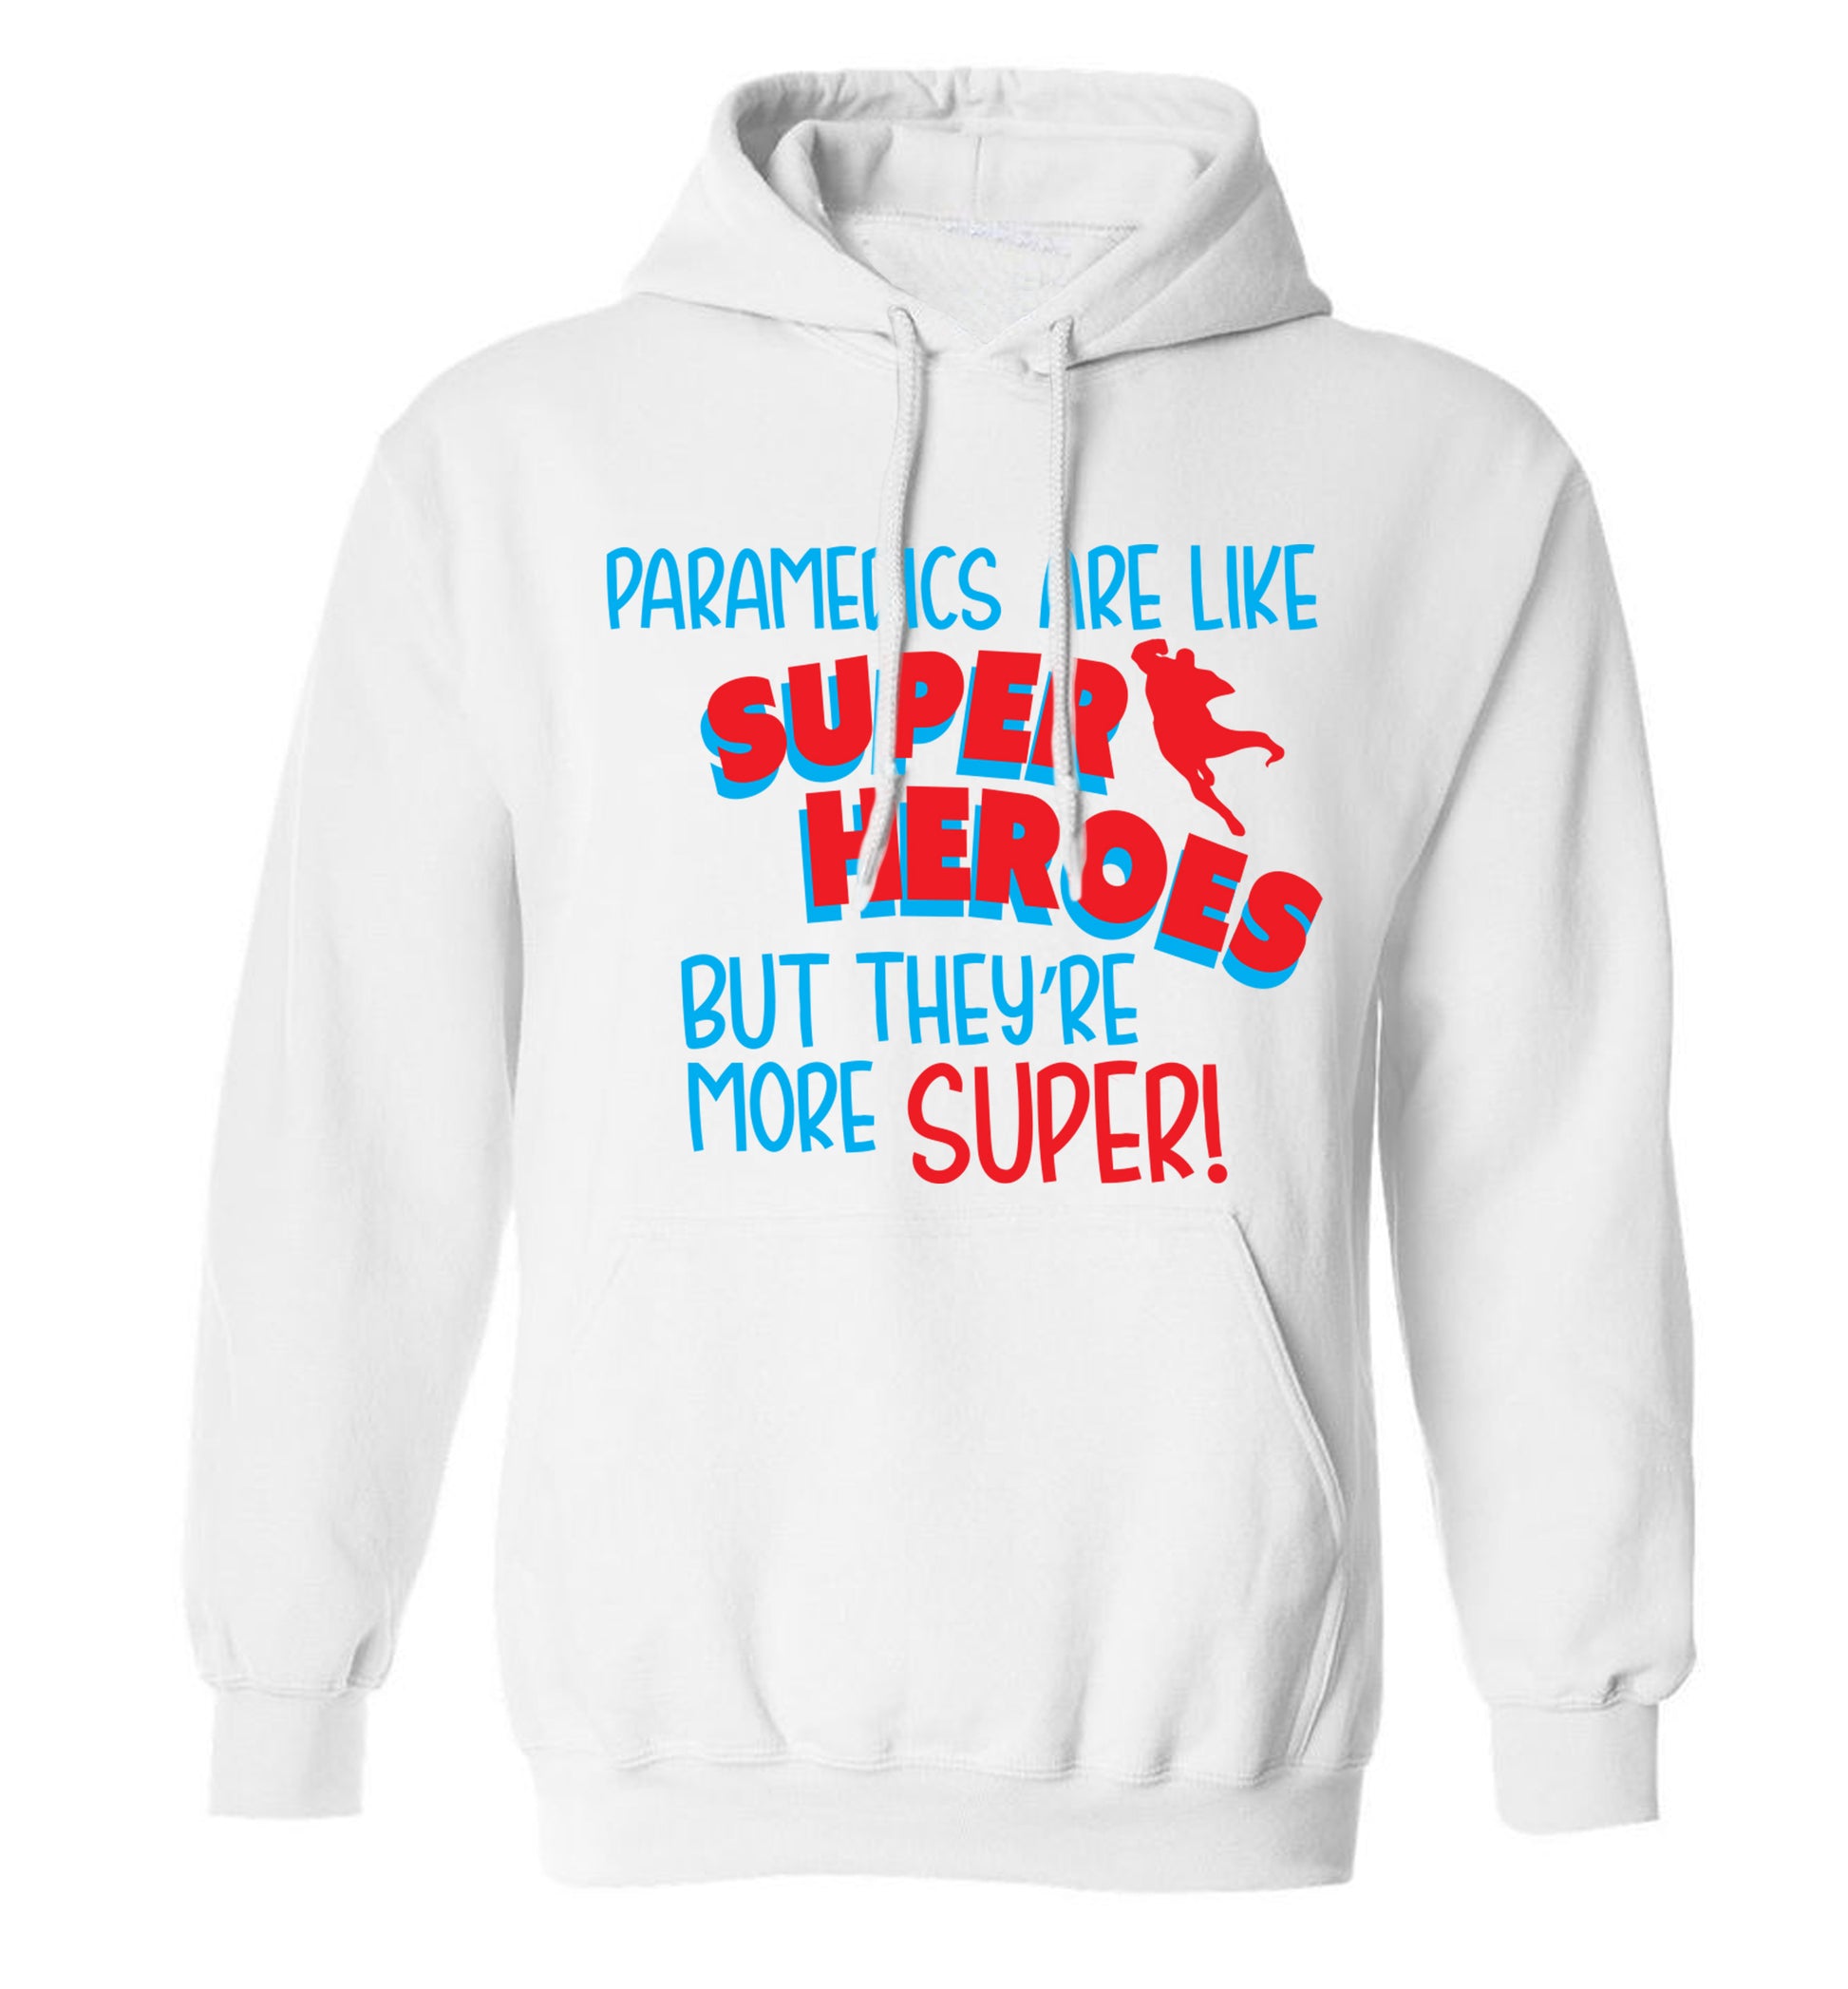 Paramedics are like superheros but they're more super adults unisex white hoodie 2XL